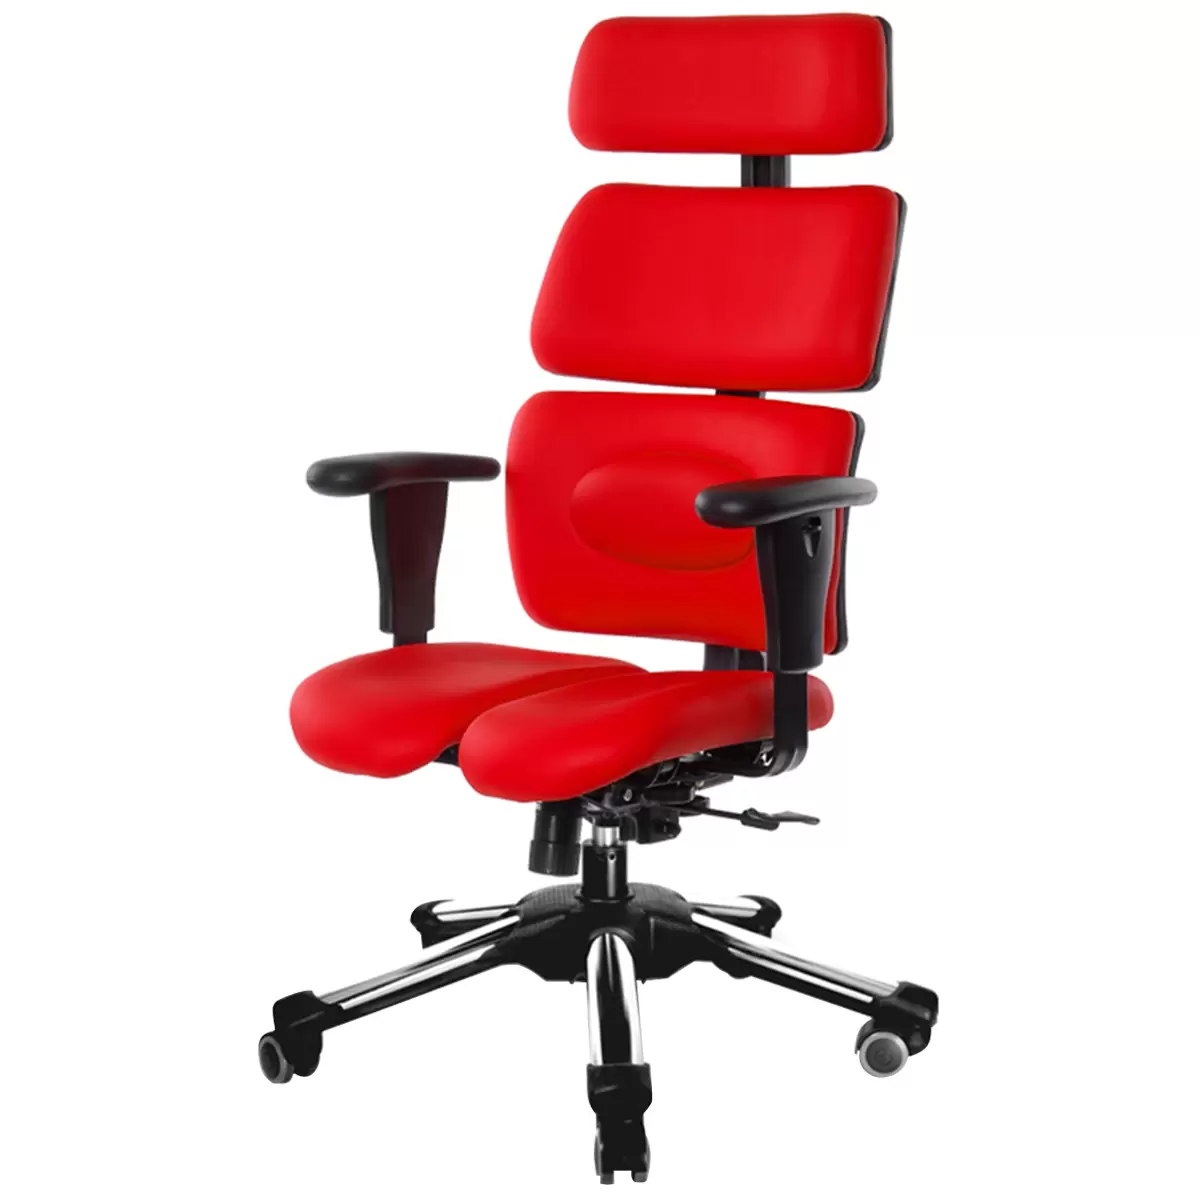 IDS Hara Chair Doctor V Black Pattern - Red